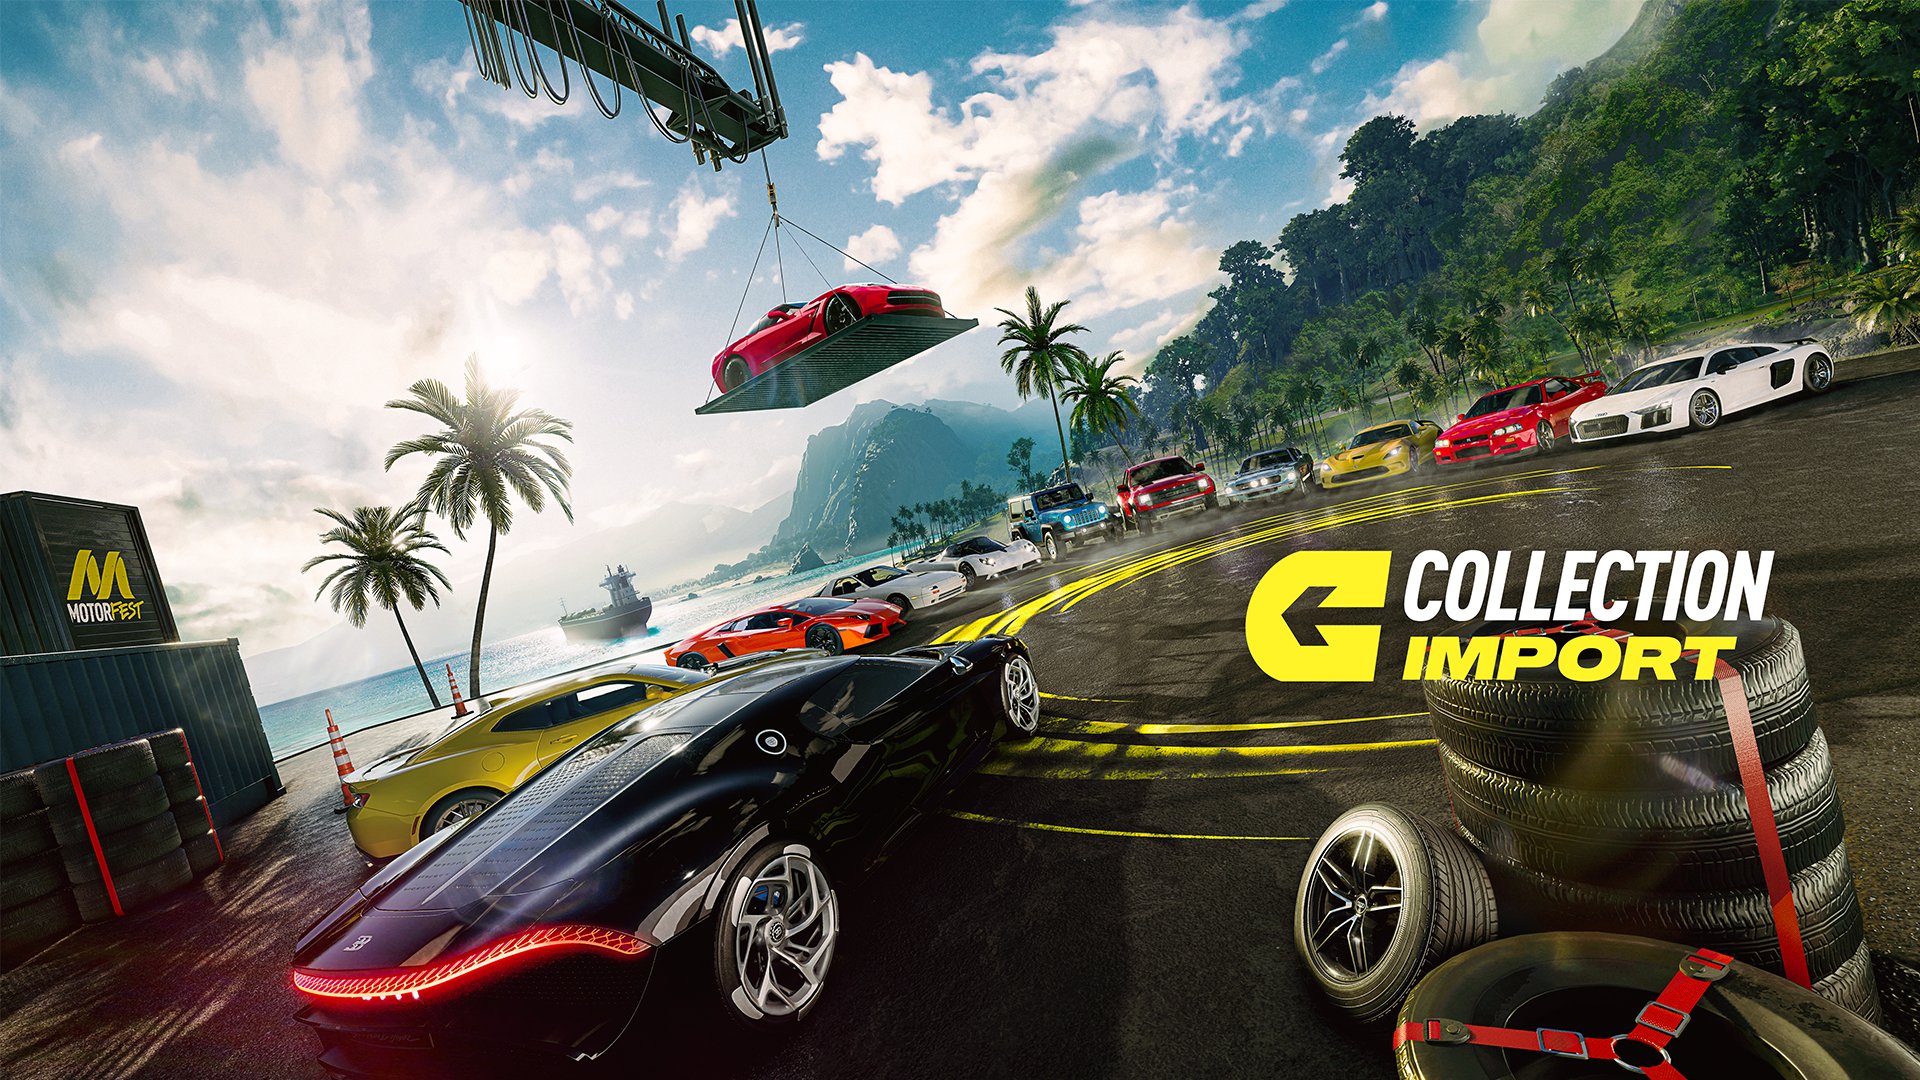 The Crew 2 Crossplay Is The Crew 2 Cross-Platform, Know All The